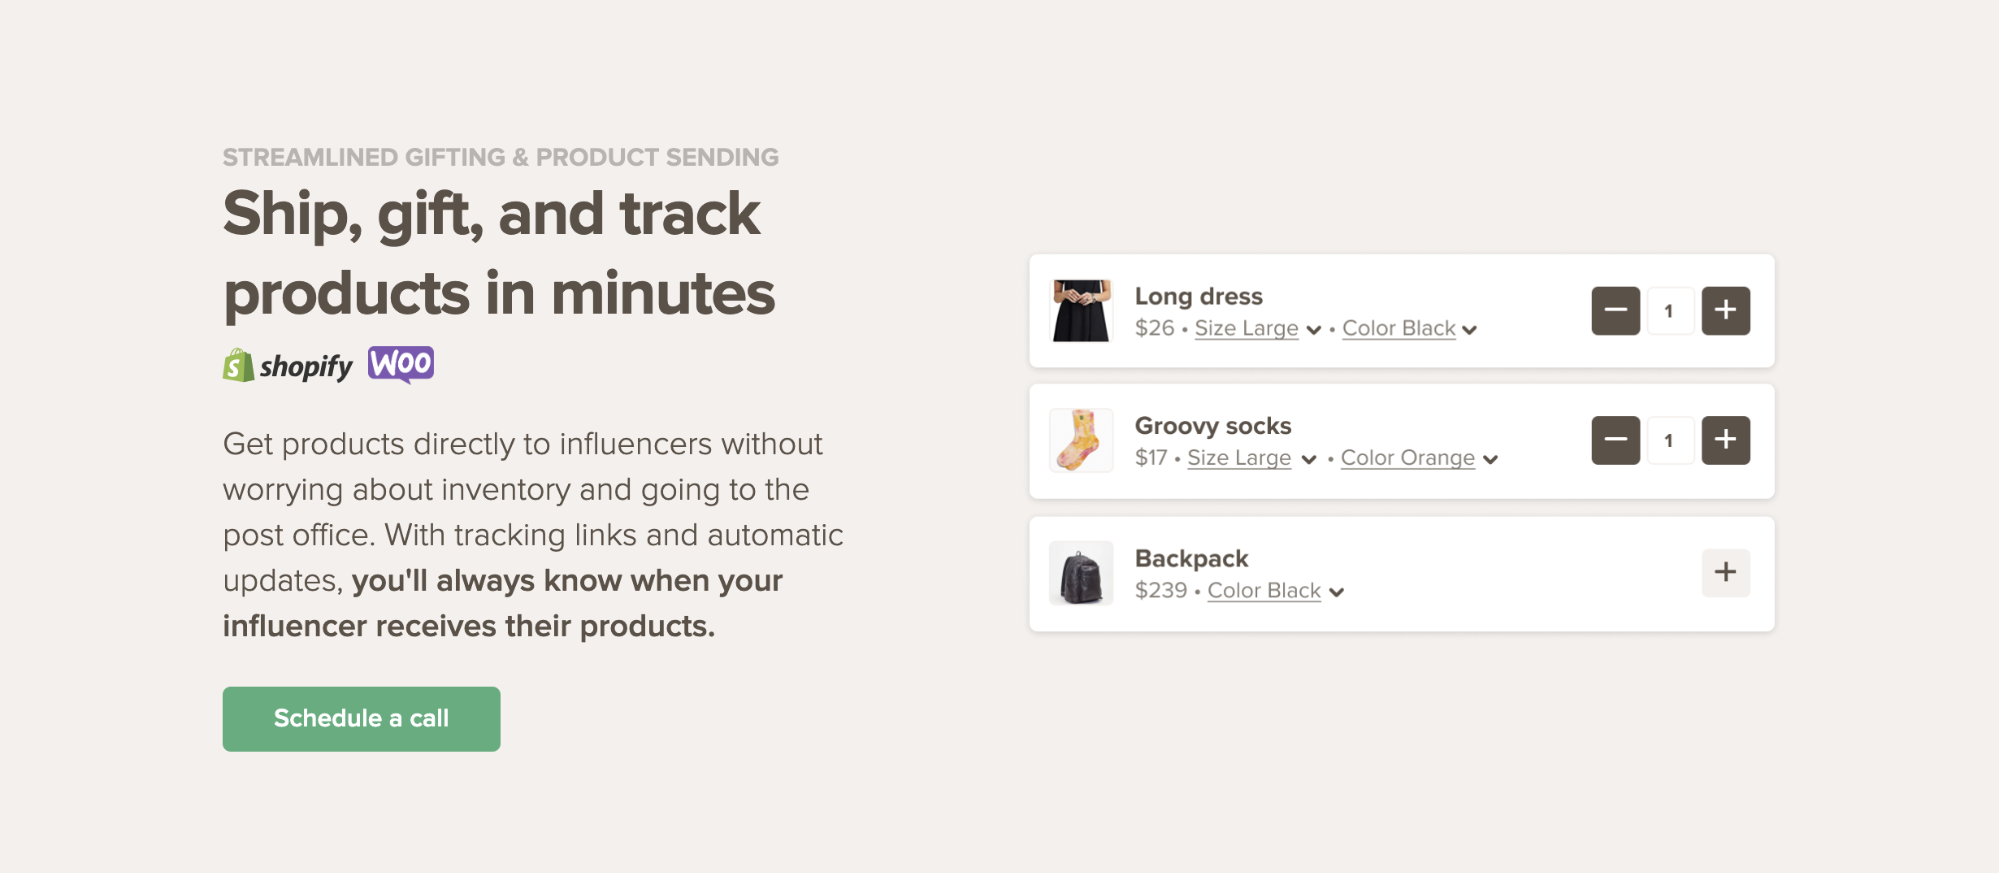 Ship, gift, and track products in minutes - image